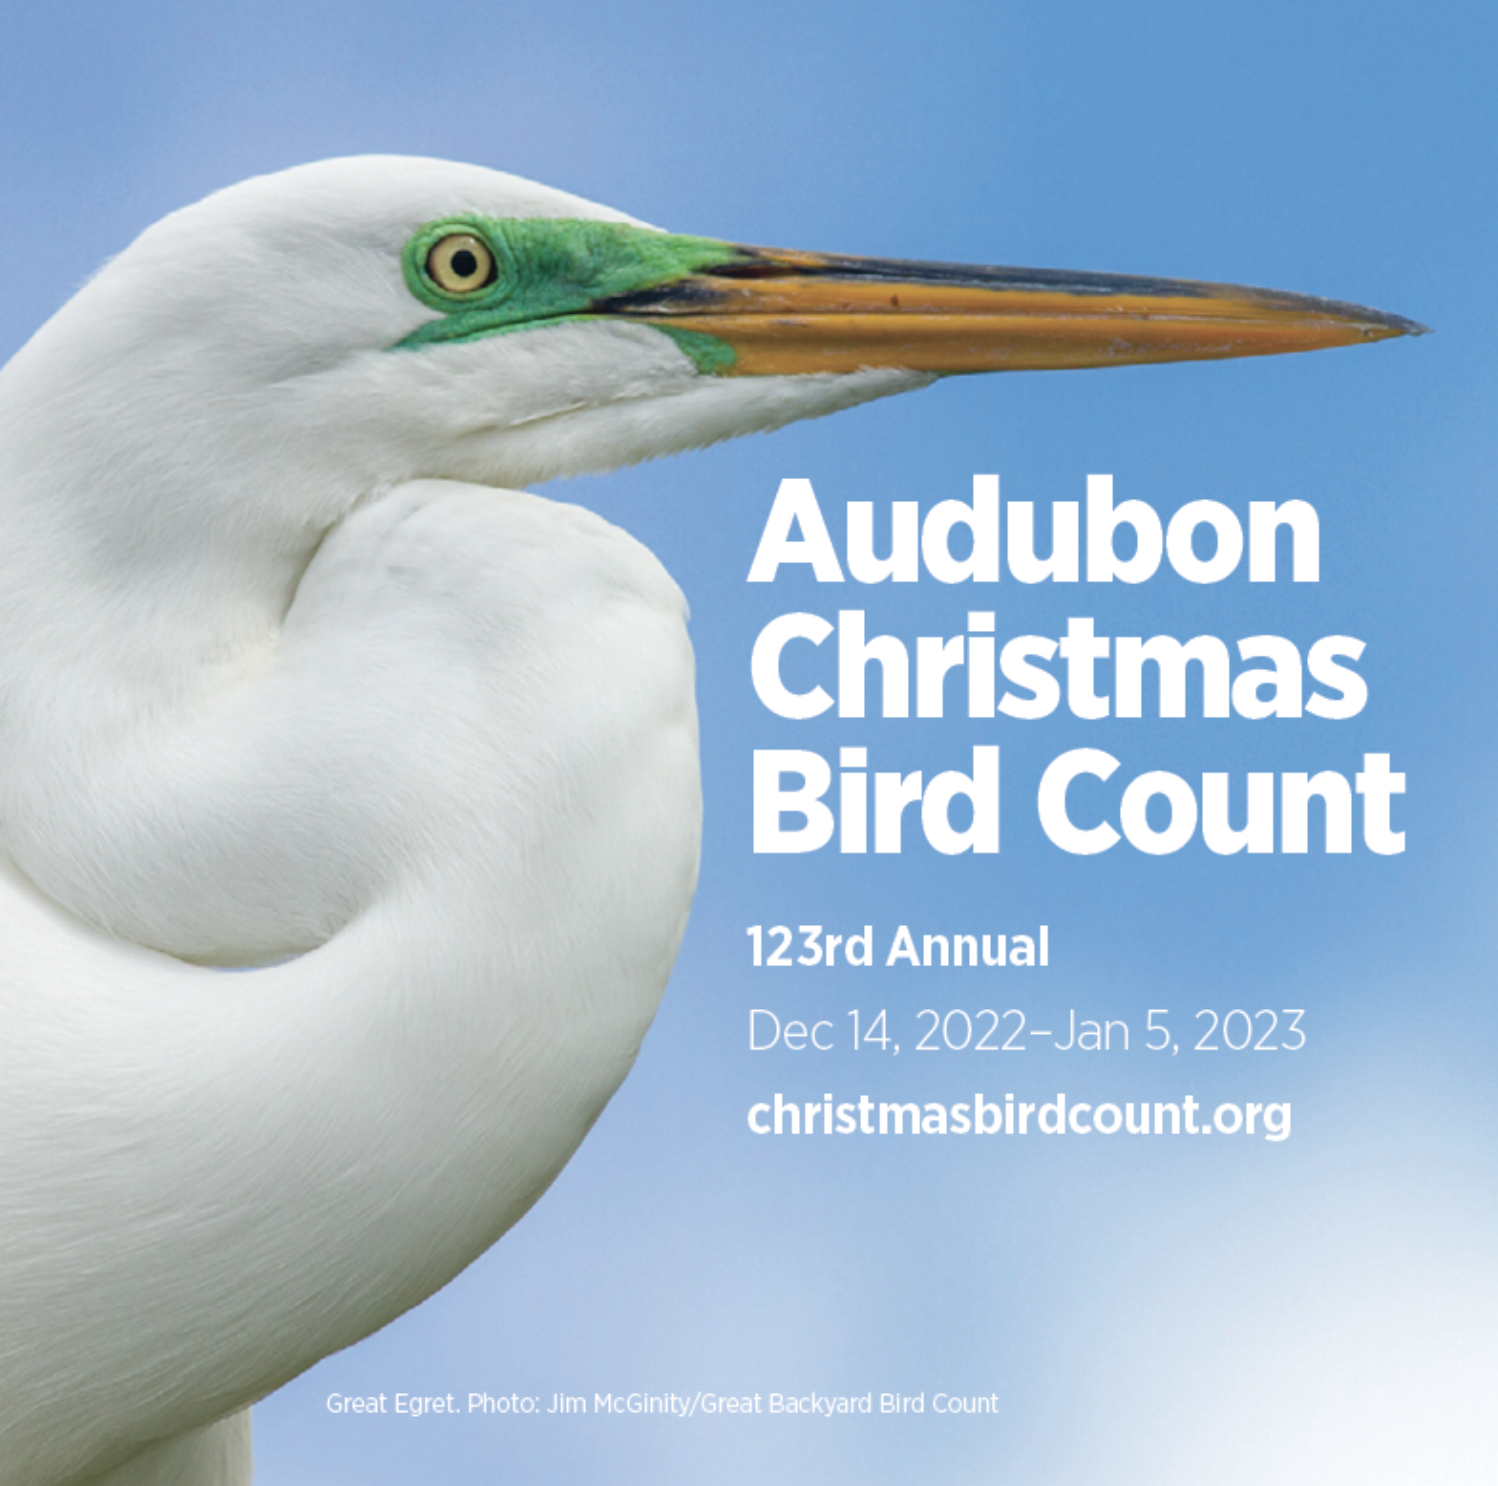 A photo of a Great Egret head and neck with 'Audubon Christmas Bird Count' text overlaid. Also: "123rd Annual Dec 14, 2022-Jan 5, 2023